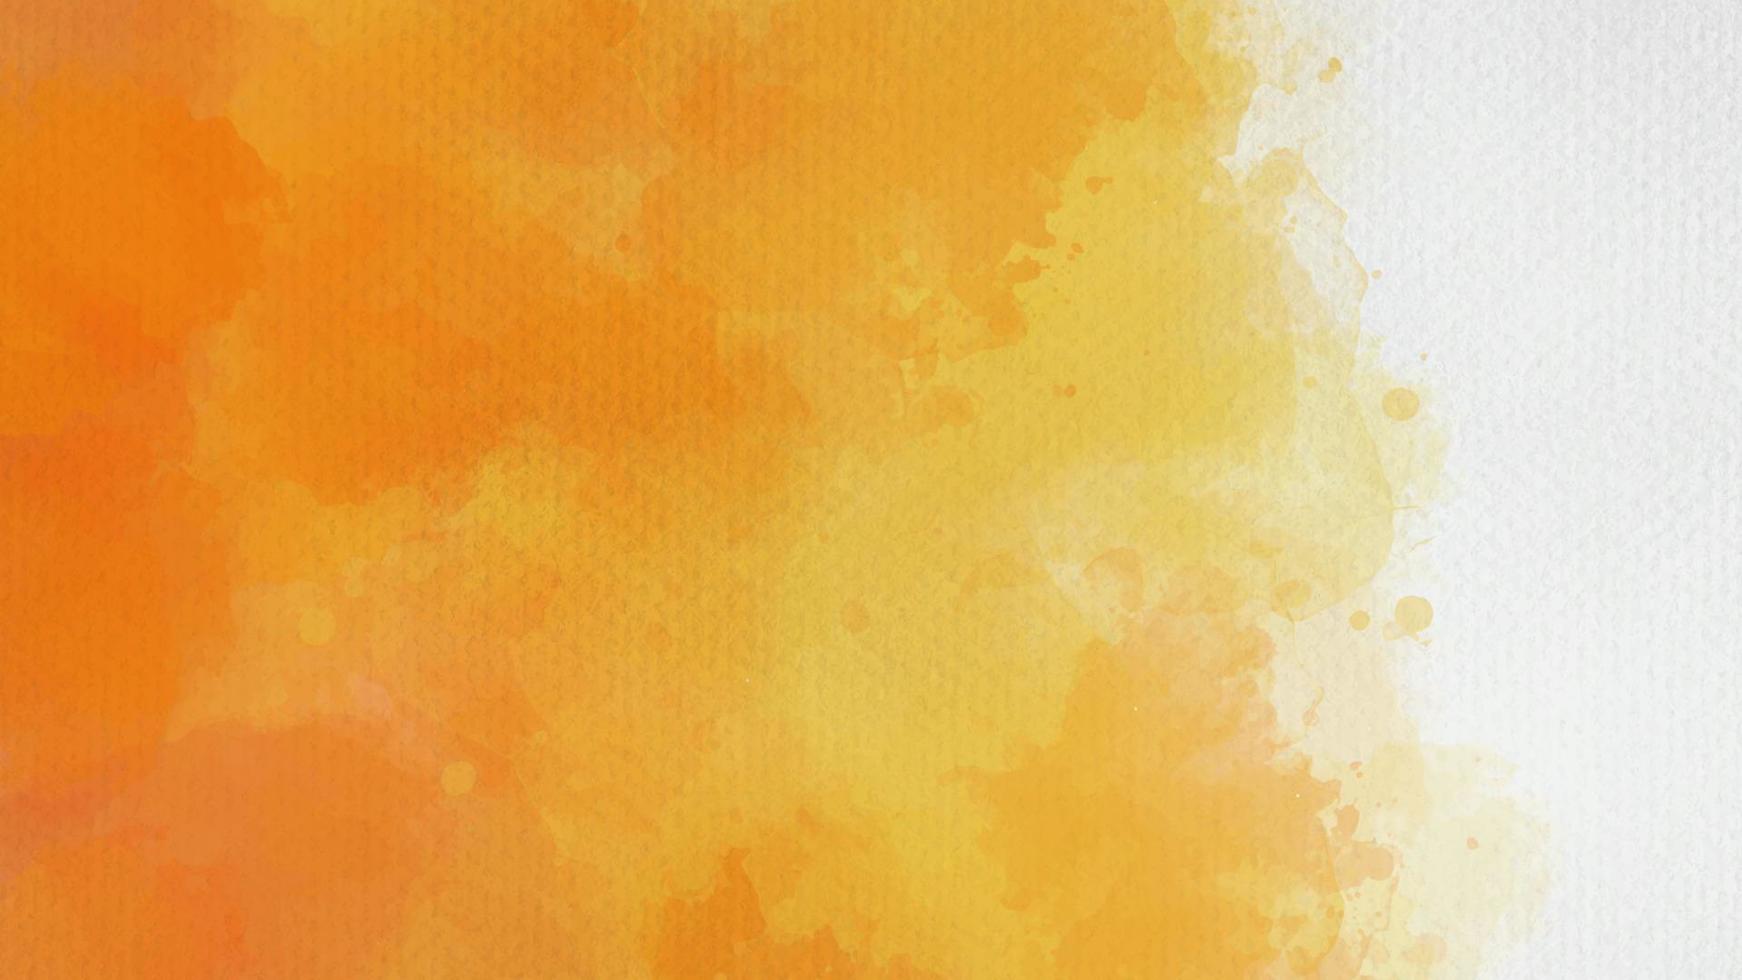 Hand painted orange and yellow color with watercolor texture abstract background vector